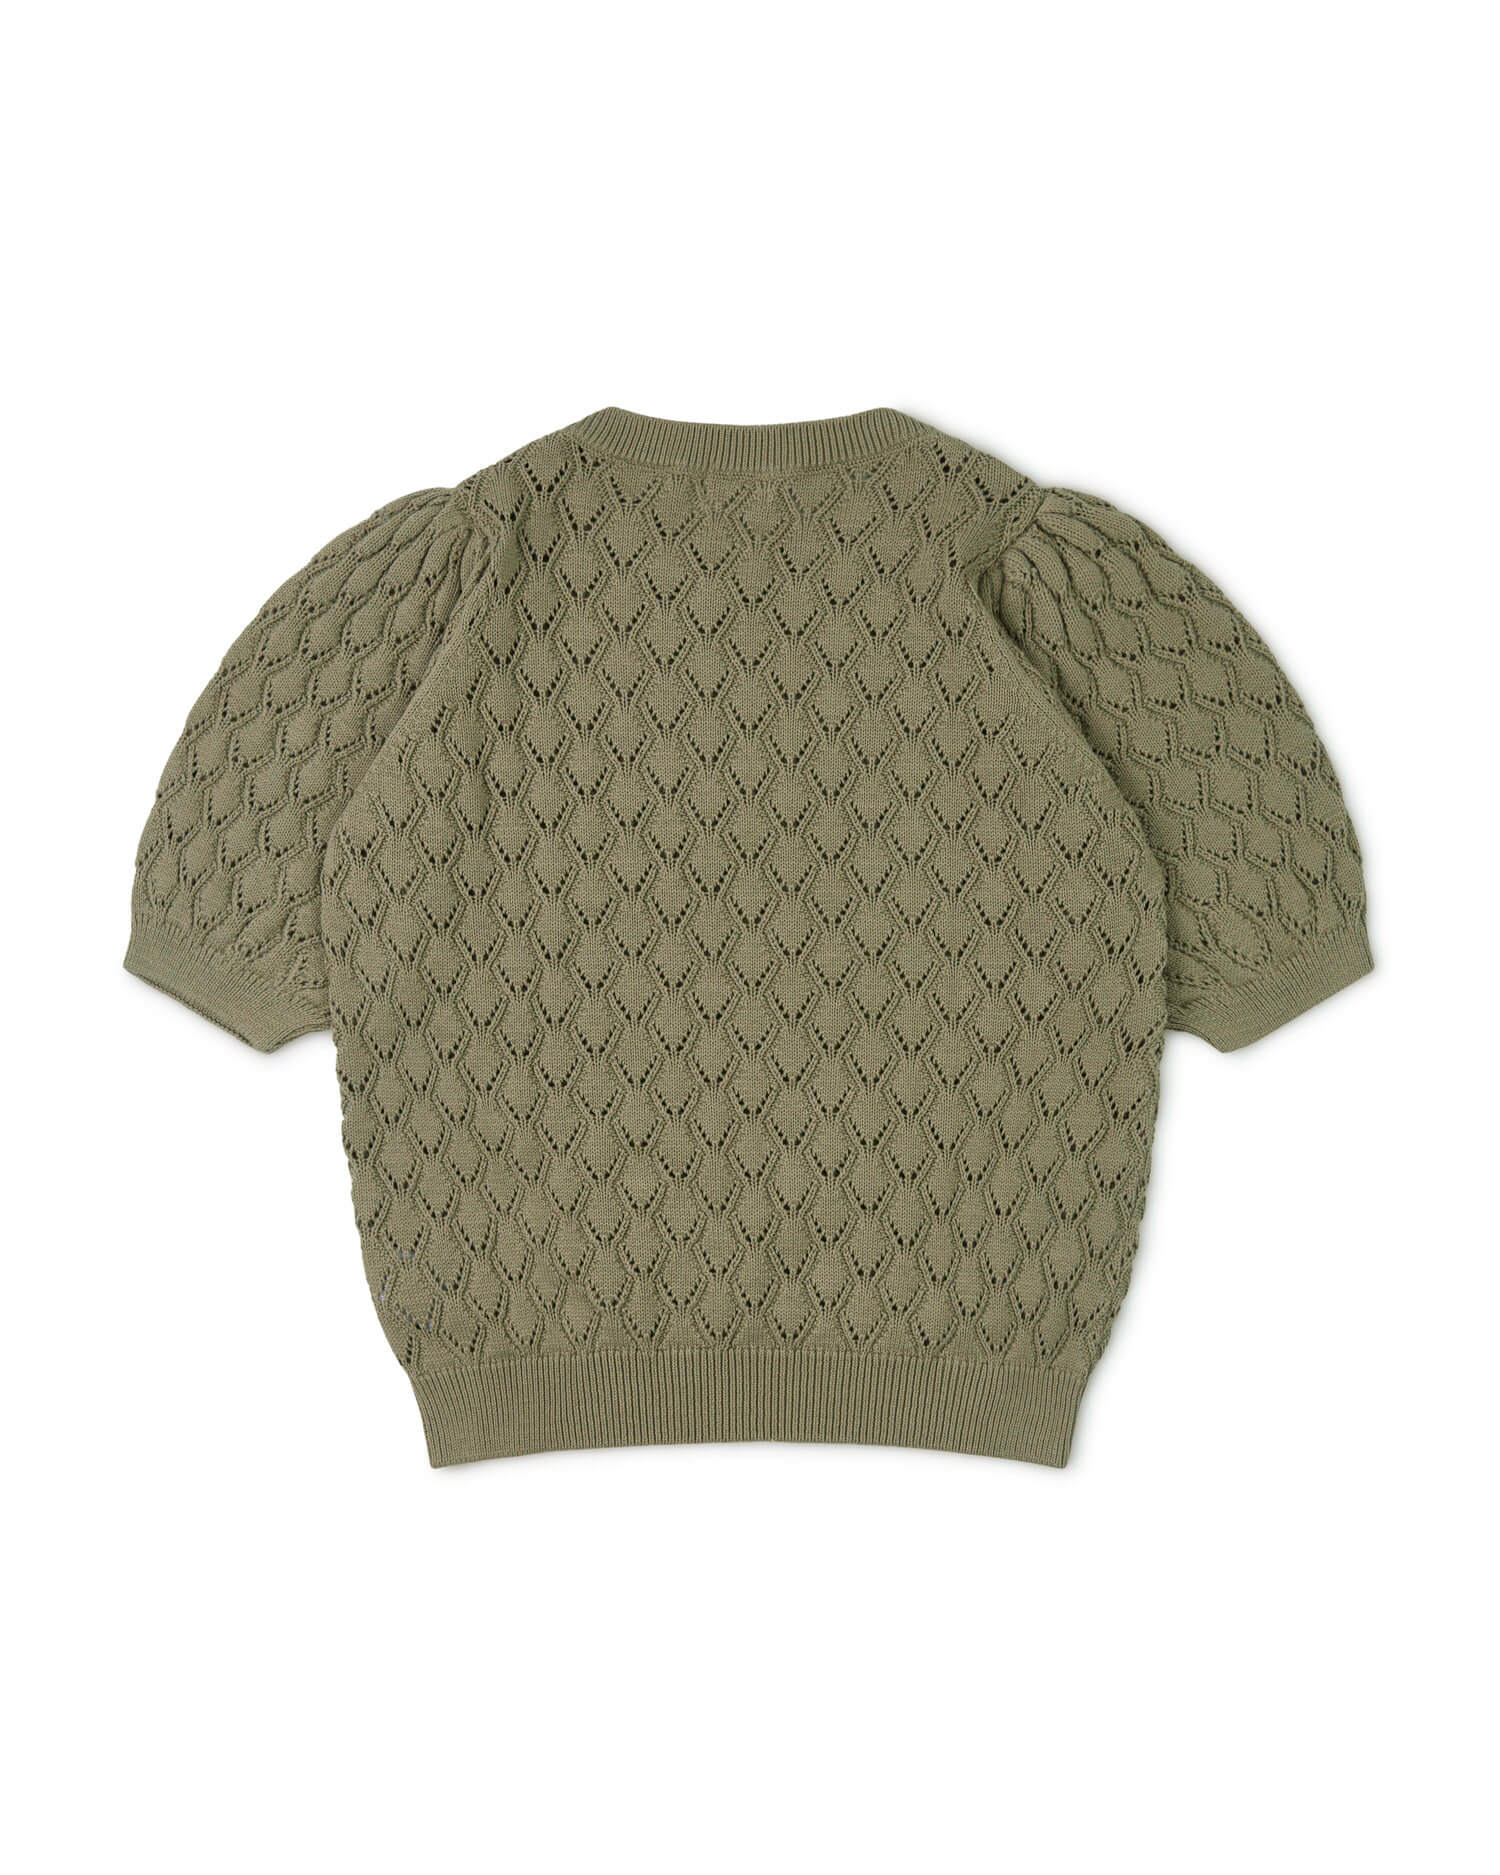 Green, knitted blouse made from 100% organic cotton by Matona